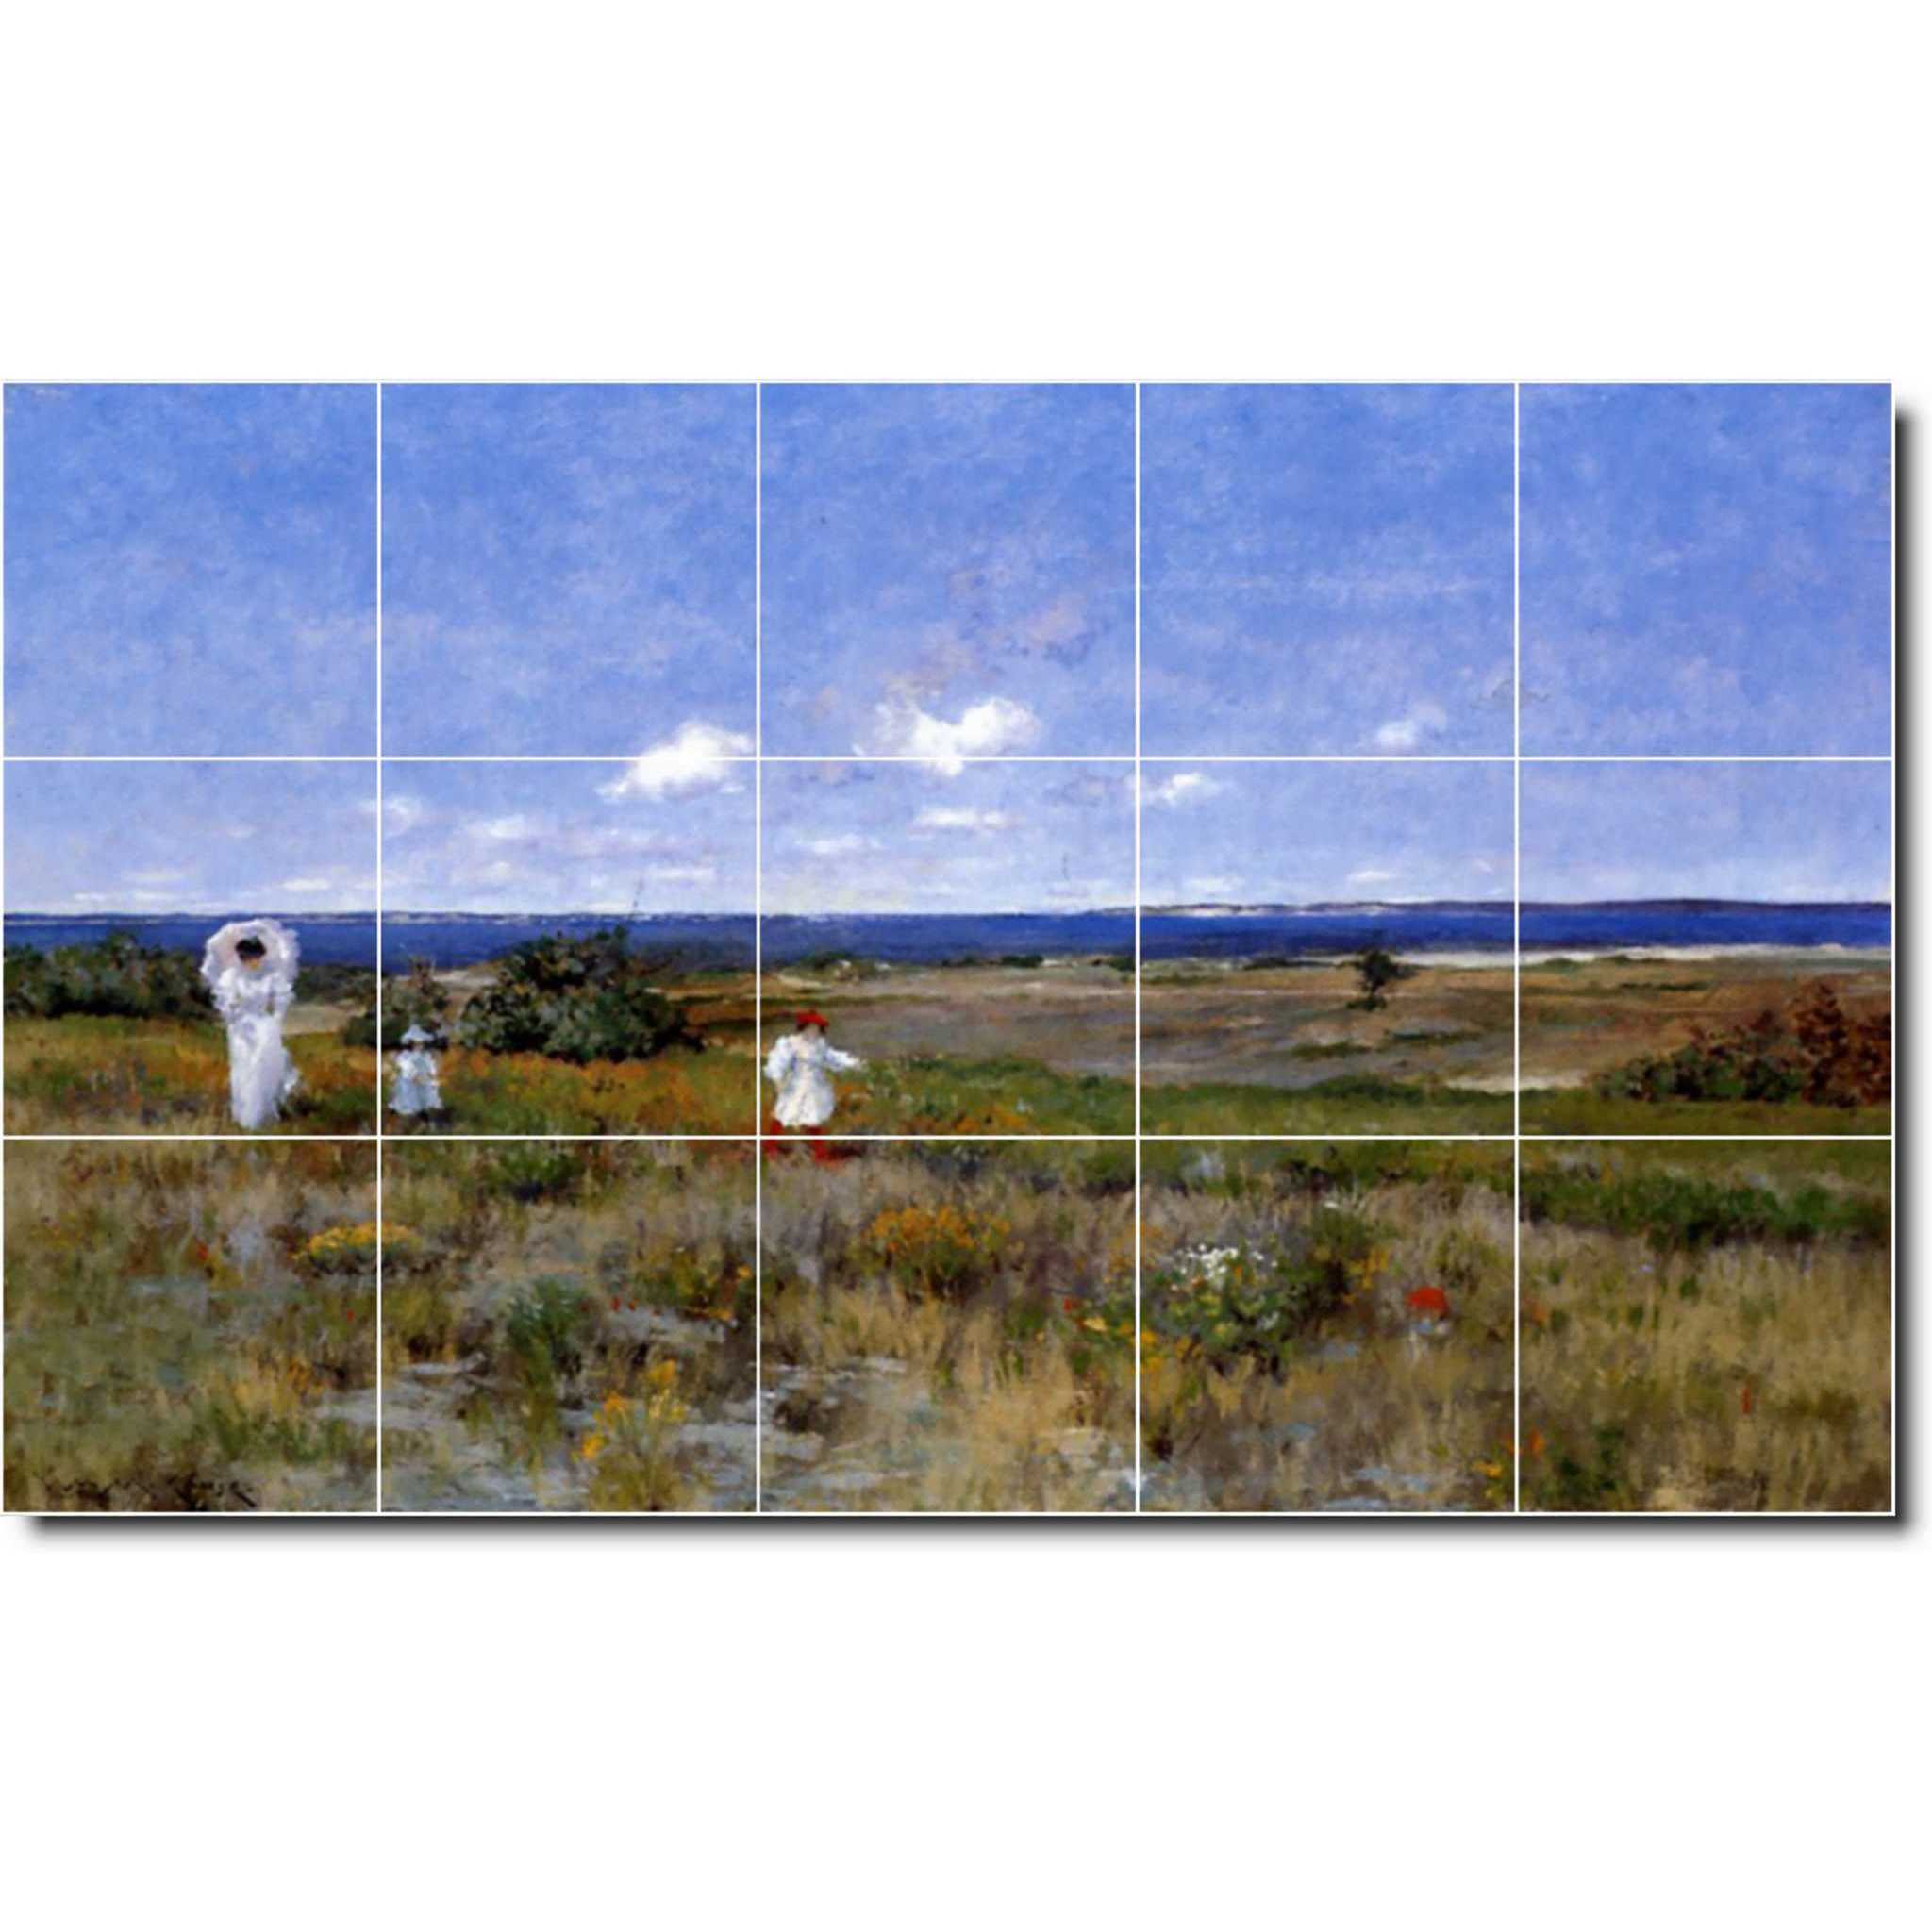 william chase waterfront painting ceramic tile mural p01575